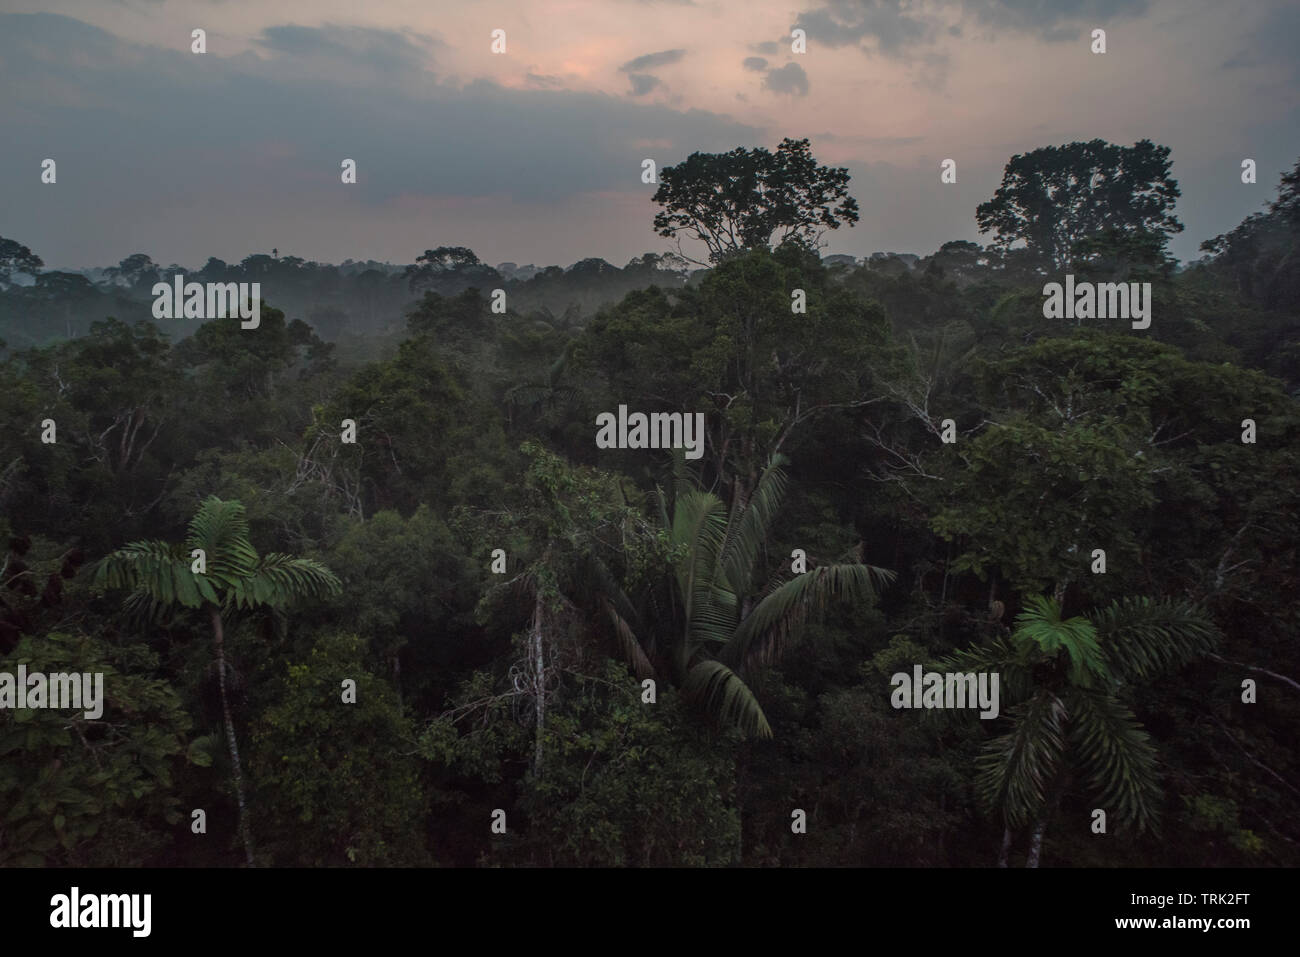 A view of the rainforest canopy in Yasuni national park, Ecuador.  Image taken from a canopy tower. Stock Photo